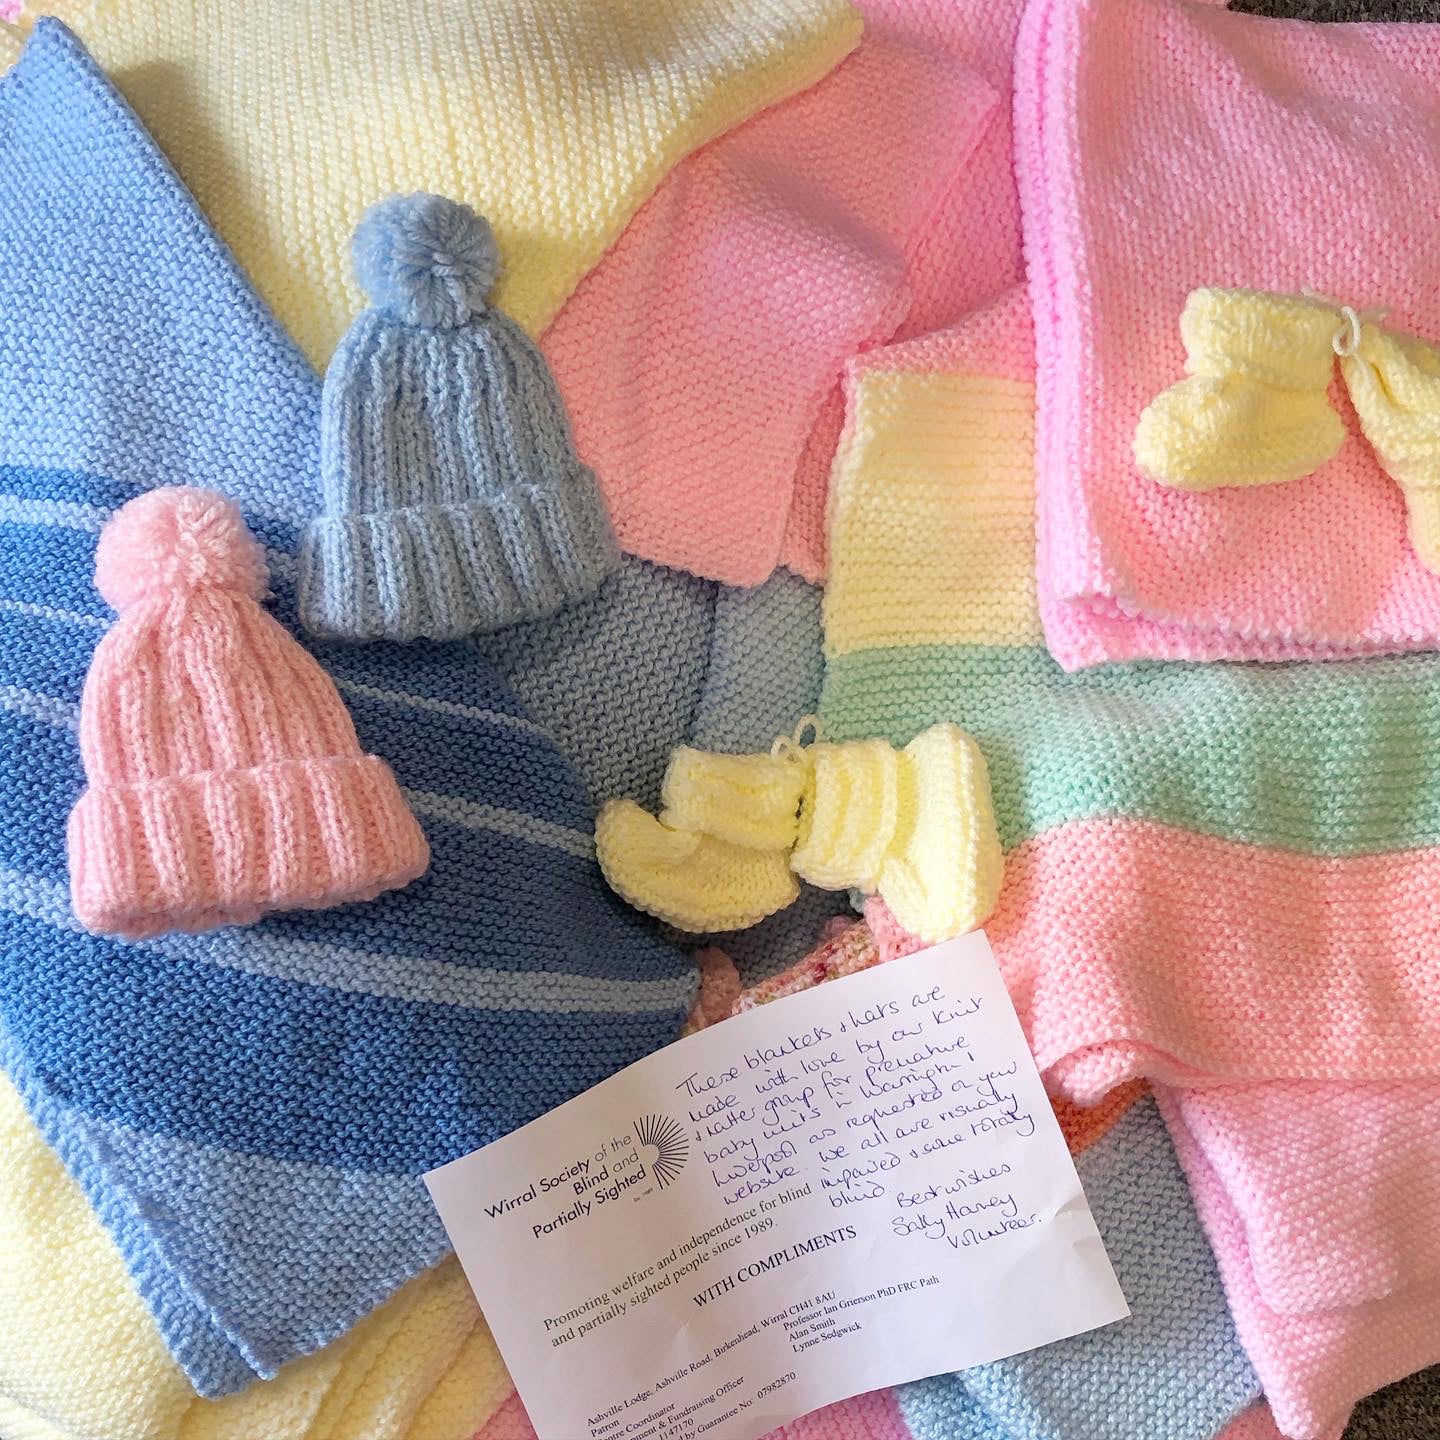 Charity Knitting for Premature Baby Neonatal Units